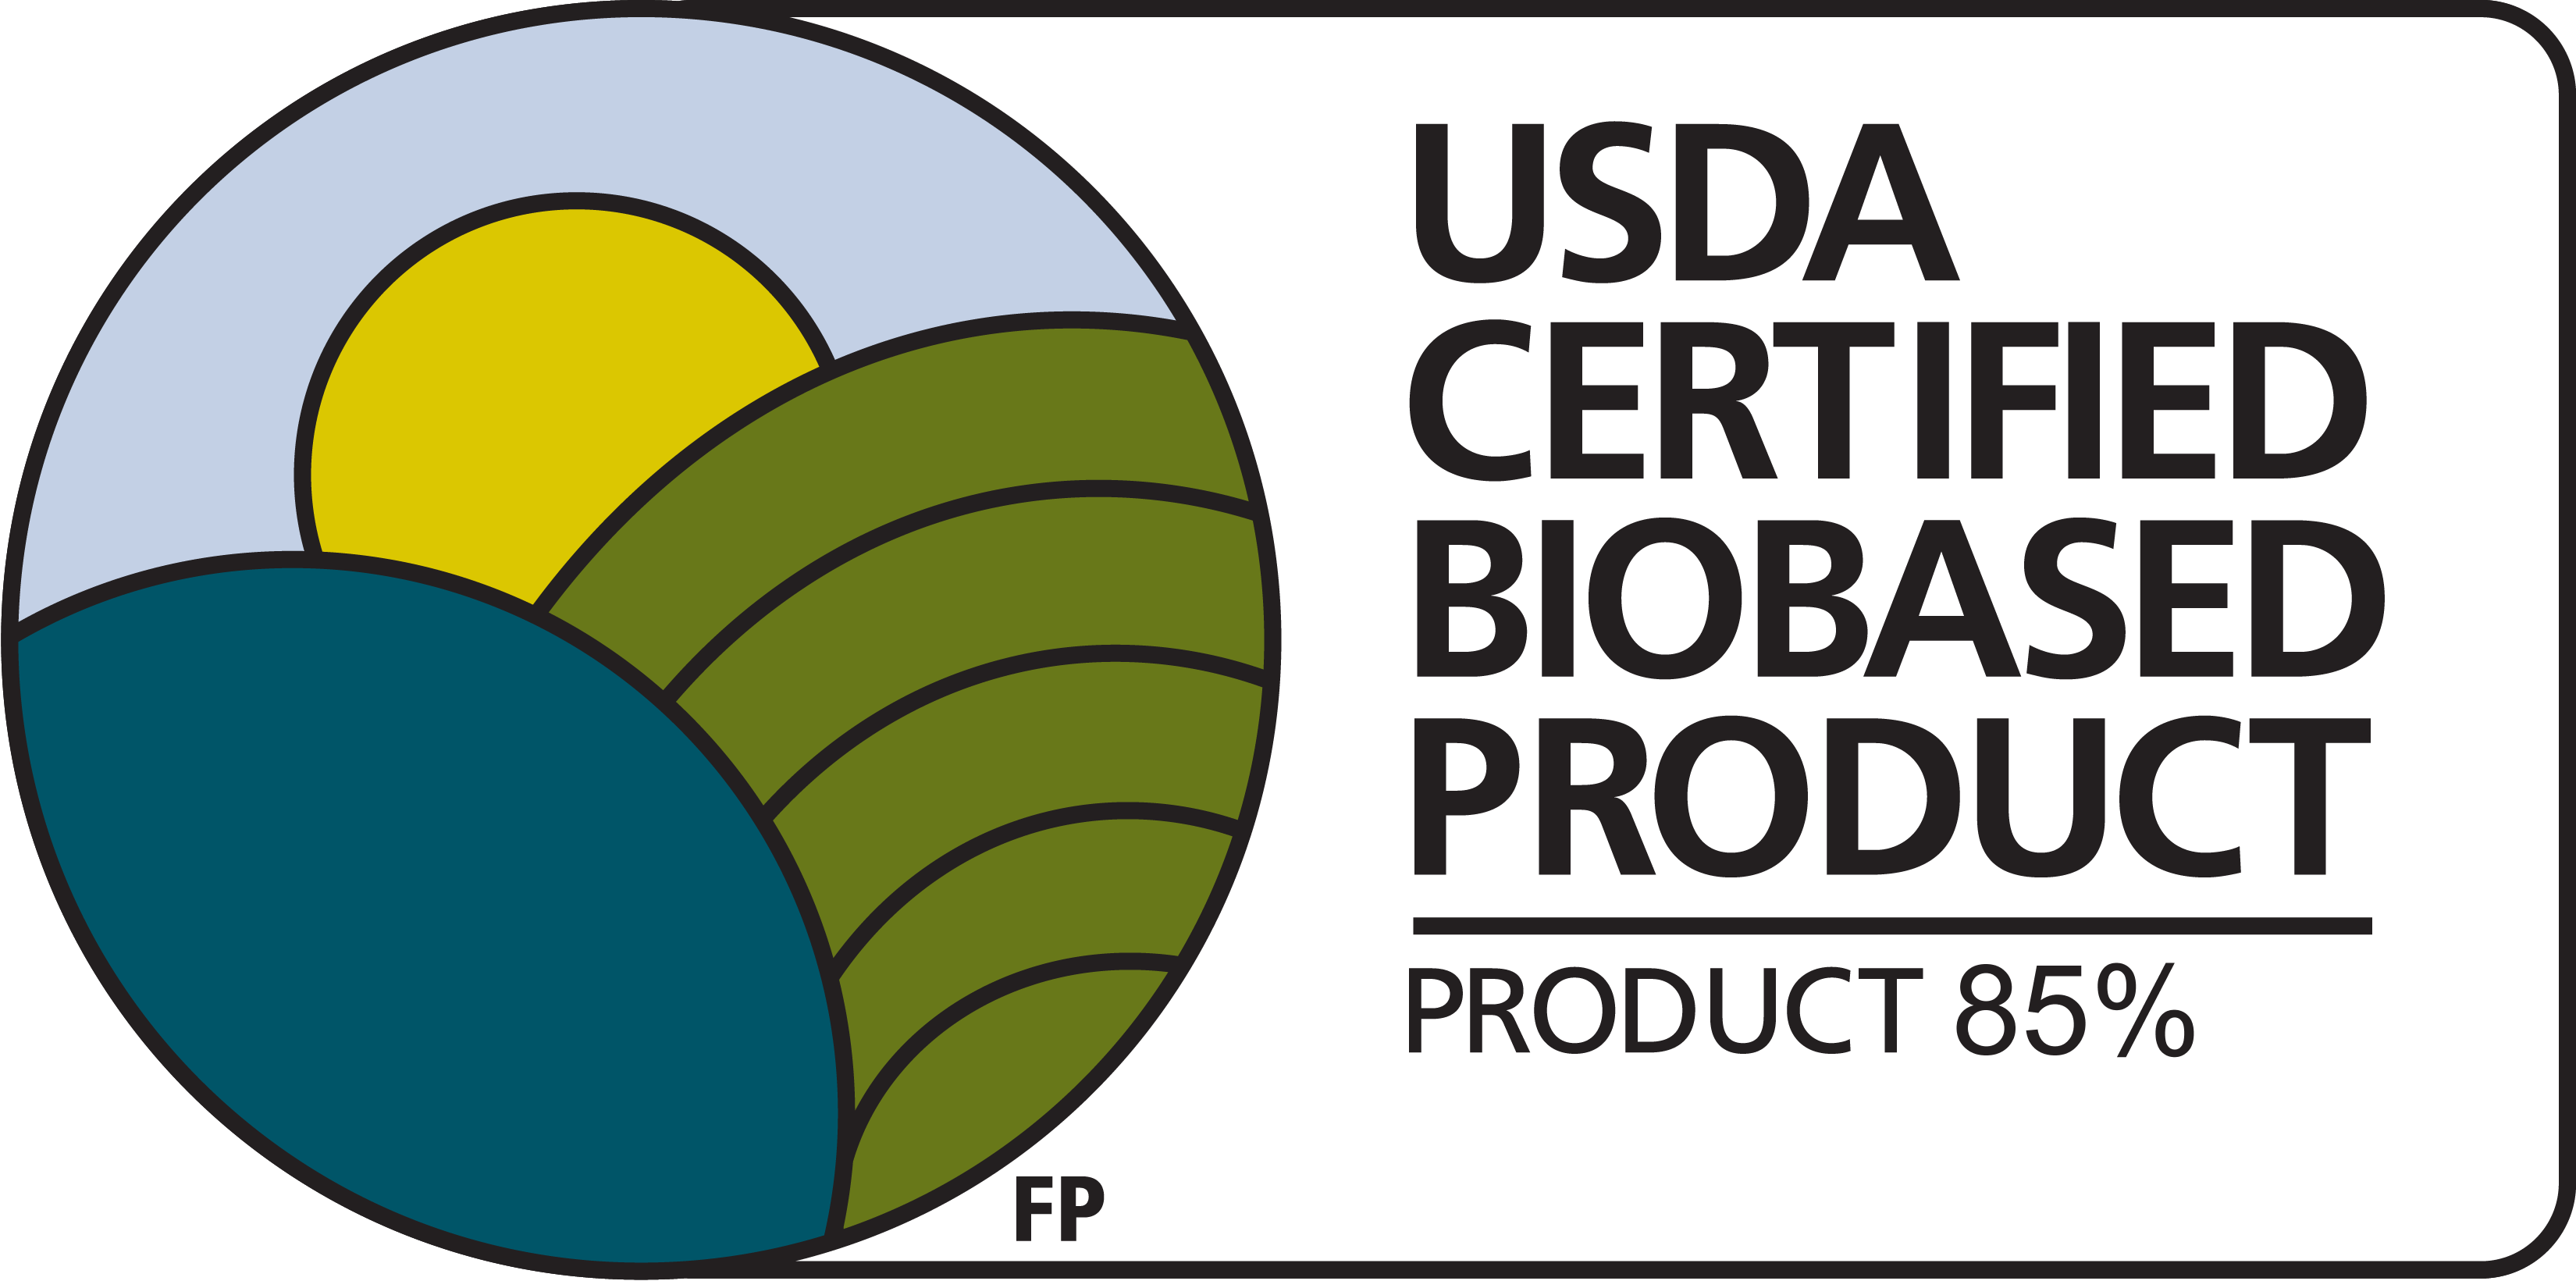 Honest Conditioner is a USDA Certified Biobased Product Label shown